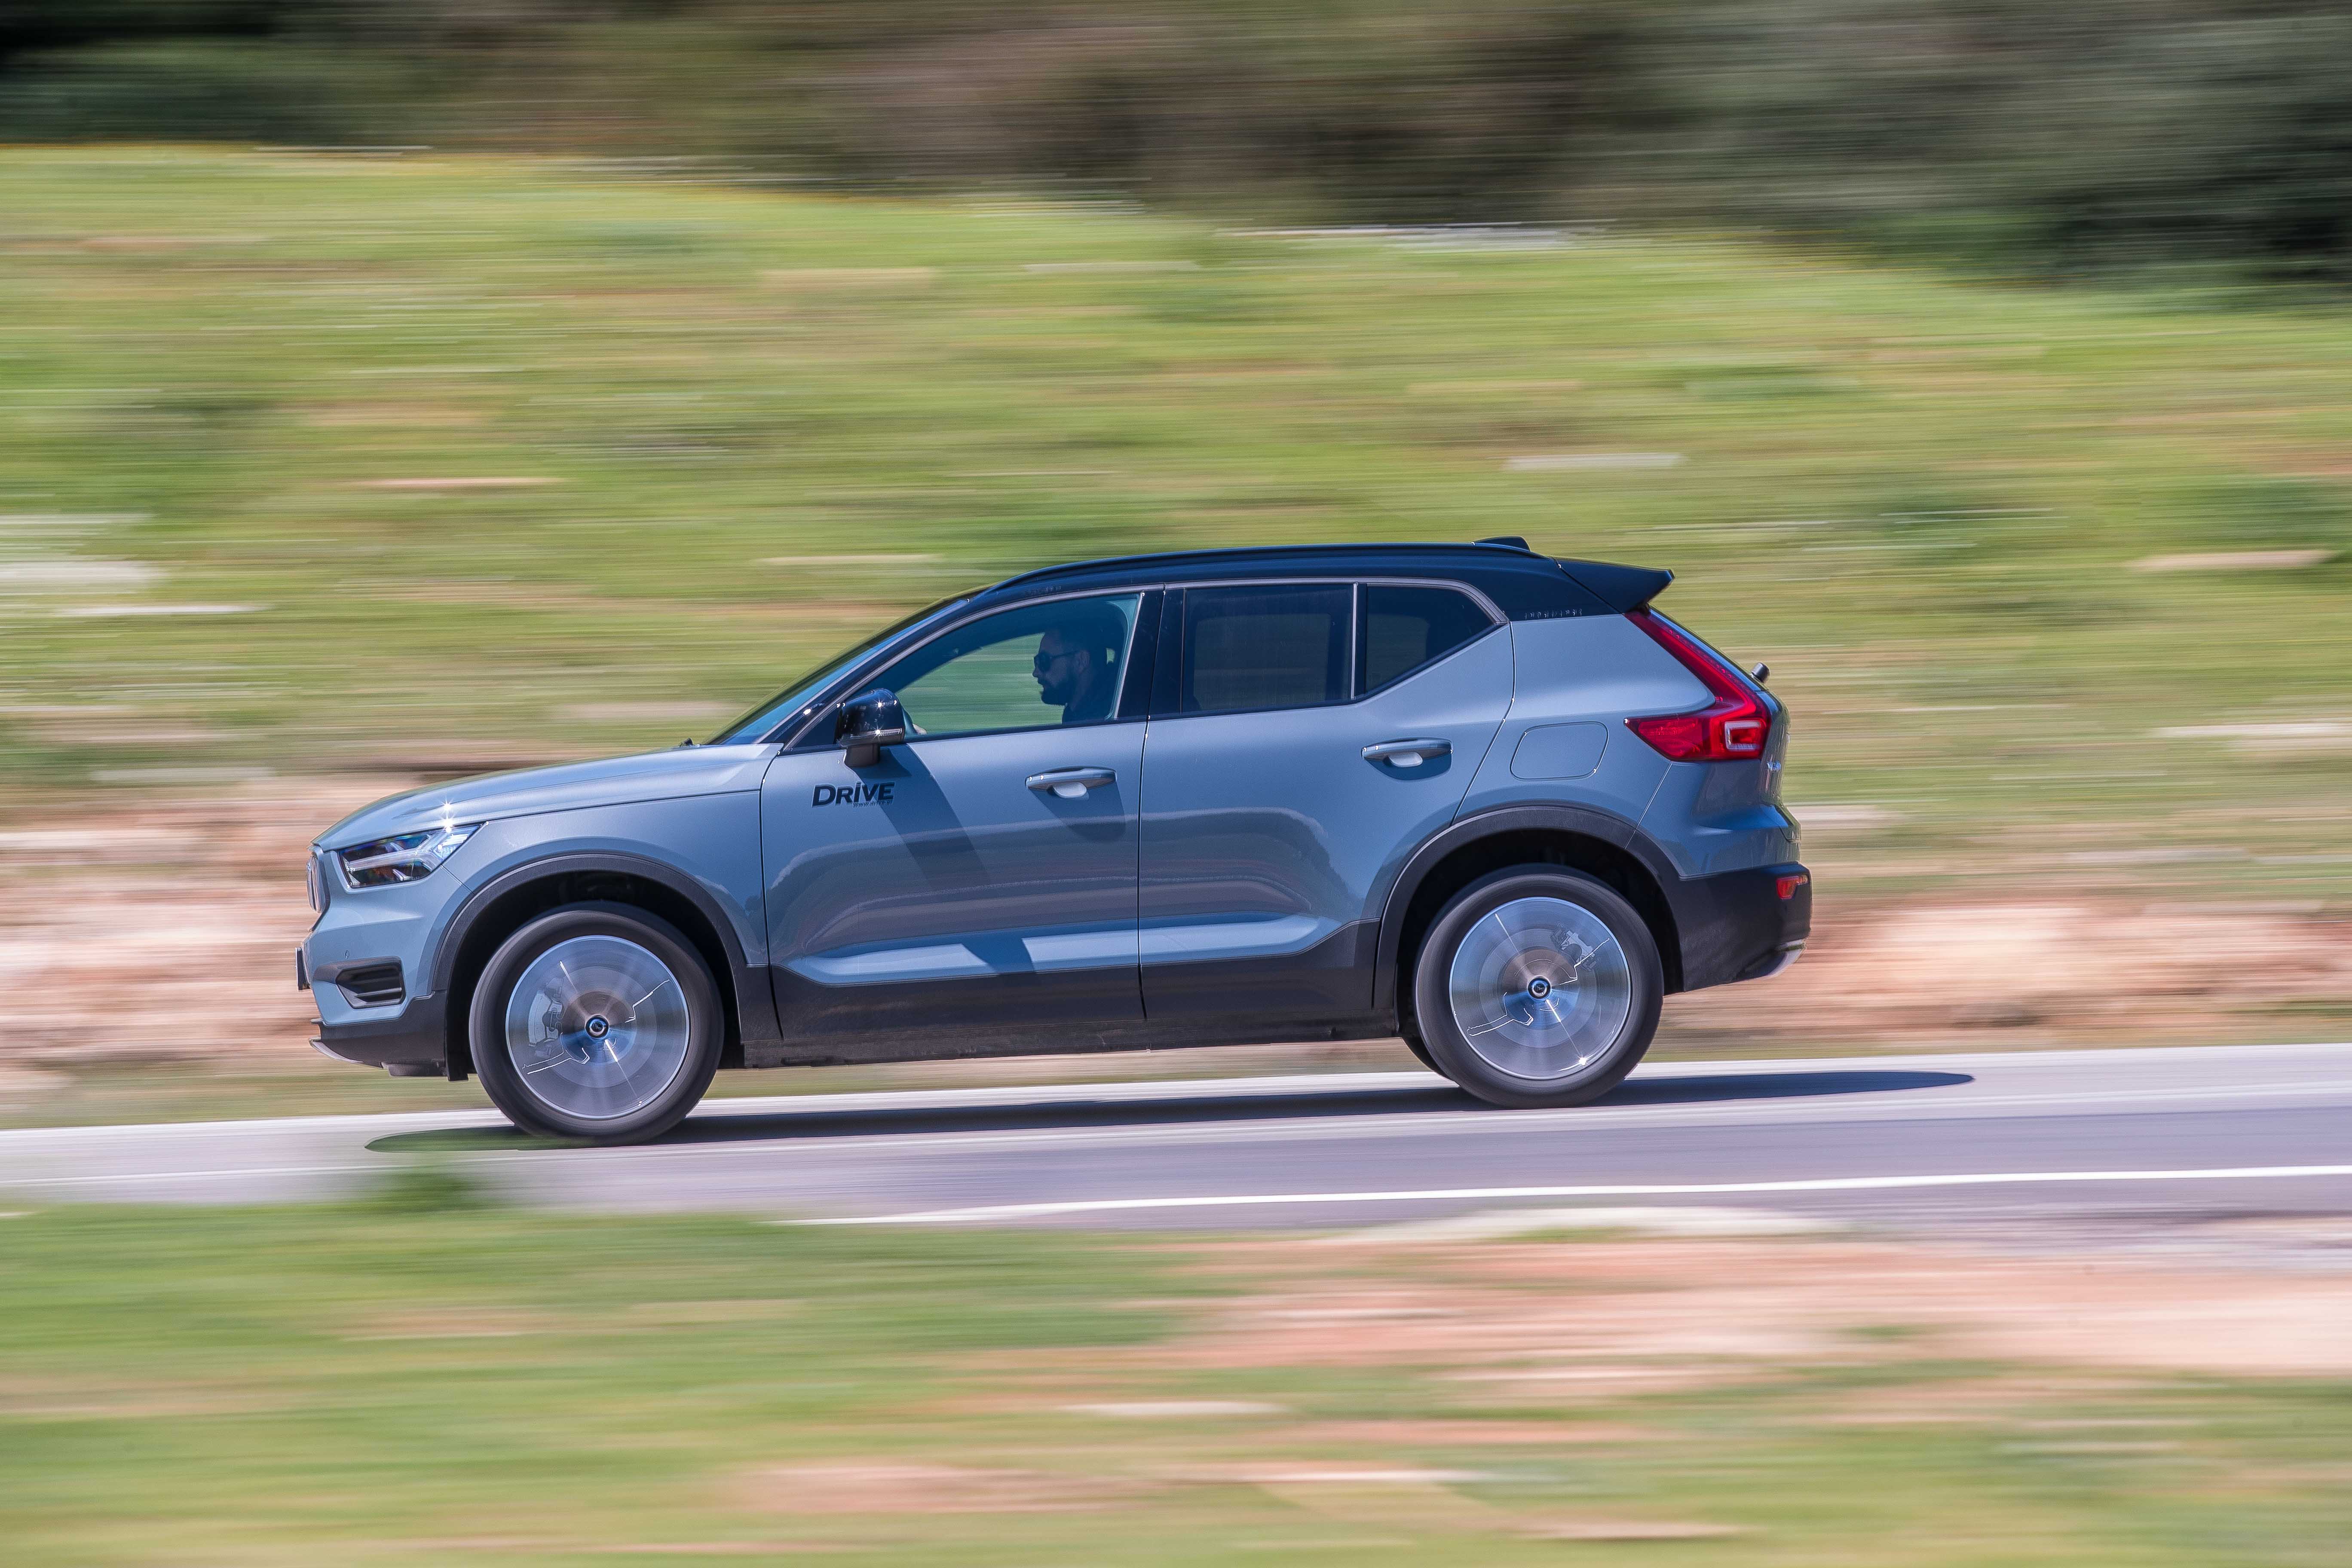 Test drive: Volvo XC40 P6 Recharge, Photo credit DRIVE Media Group/ Thanasis Koutsogiannis